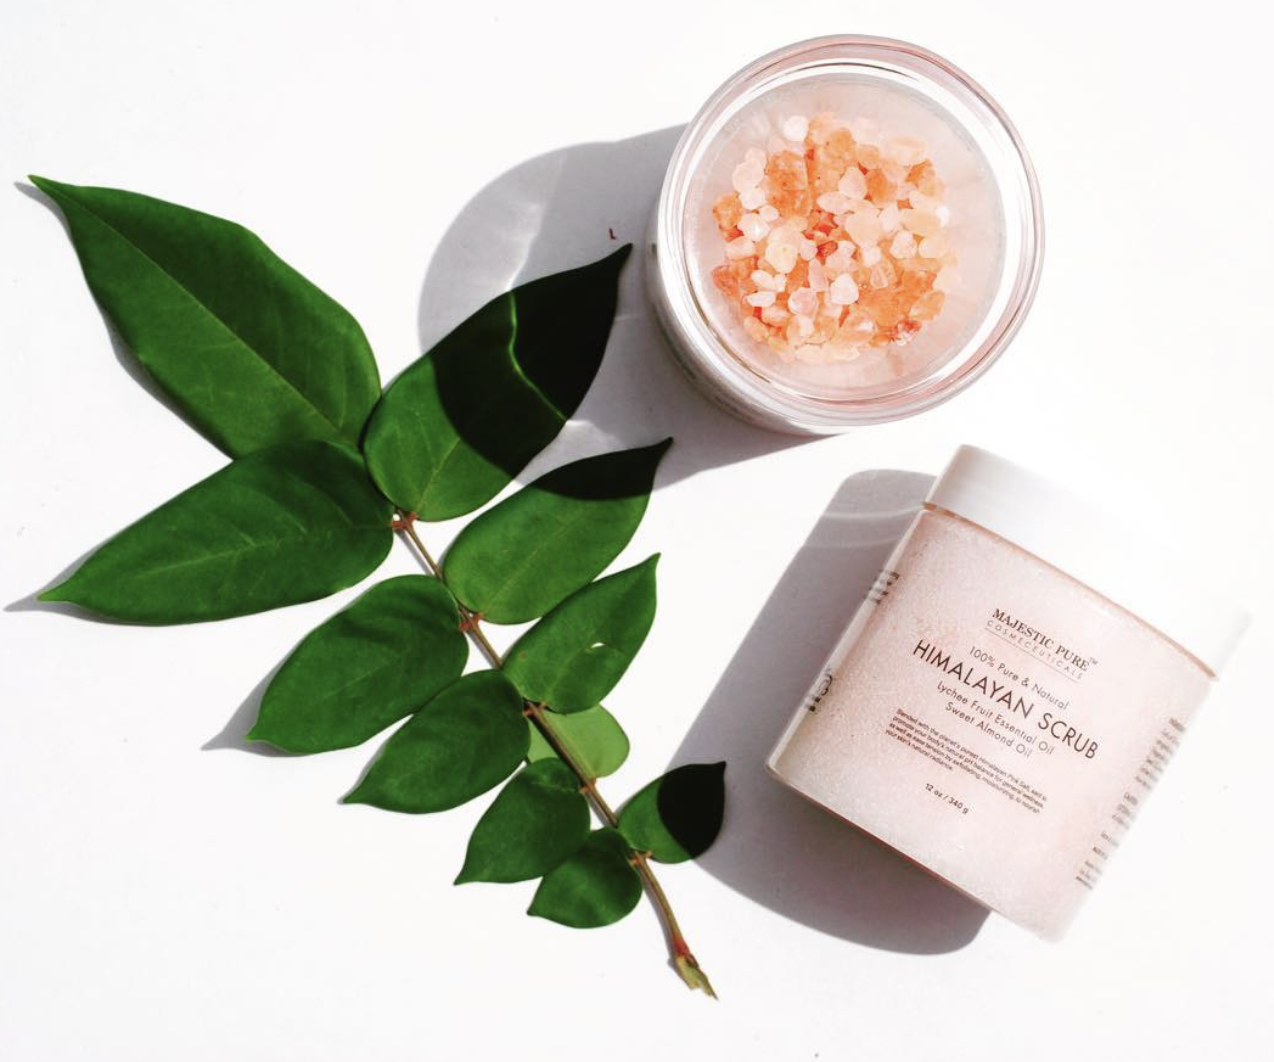 A tub of the salt scrub next to a plant leaf and a bowl of himalayan salt